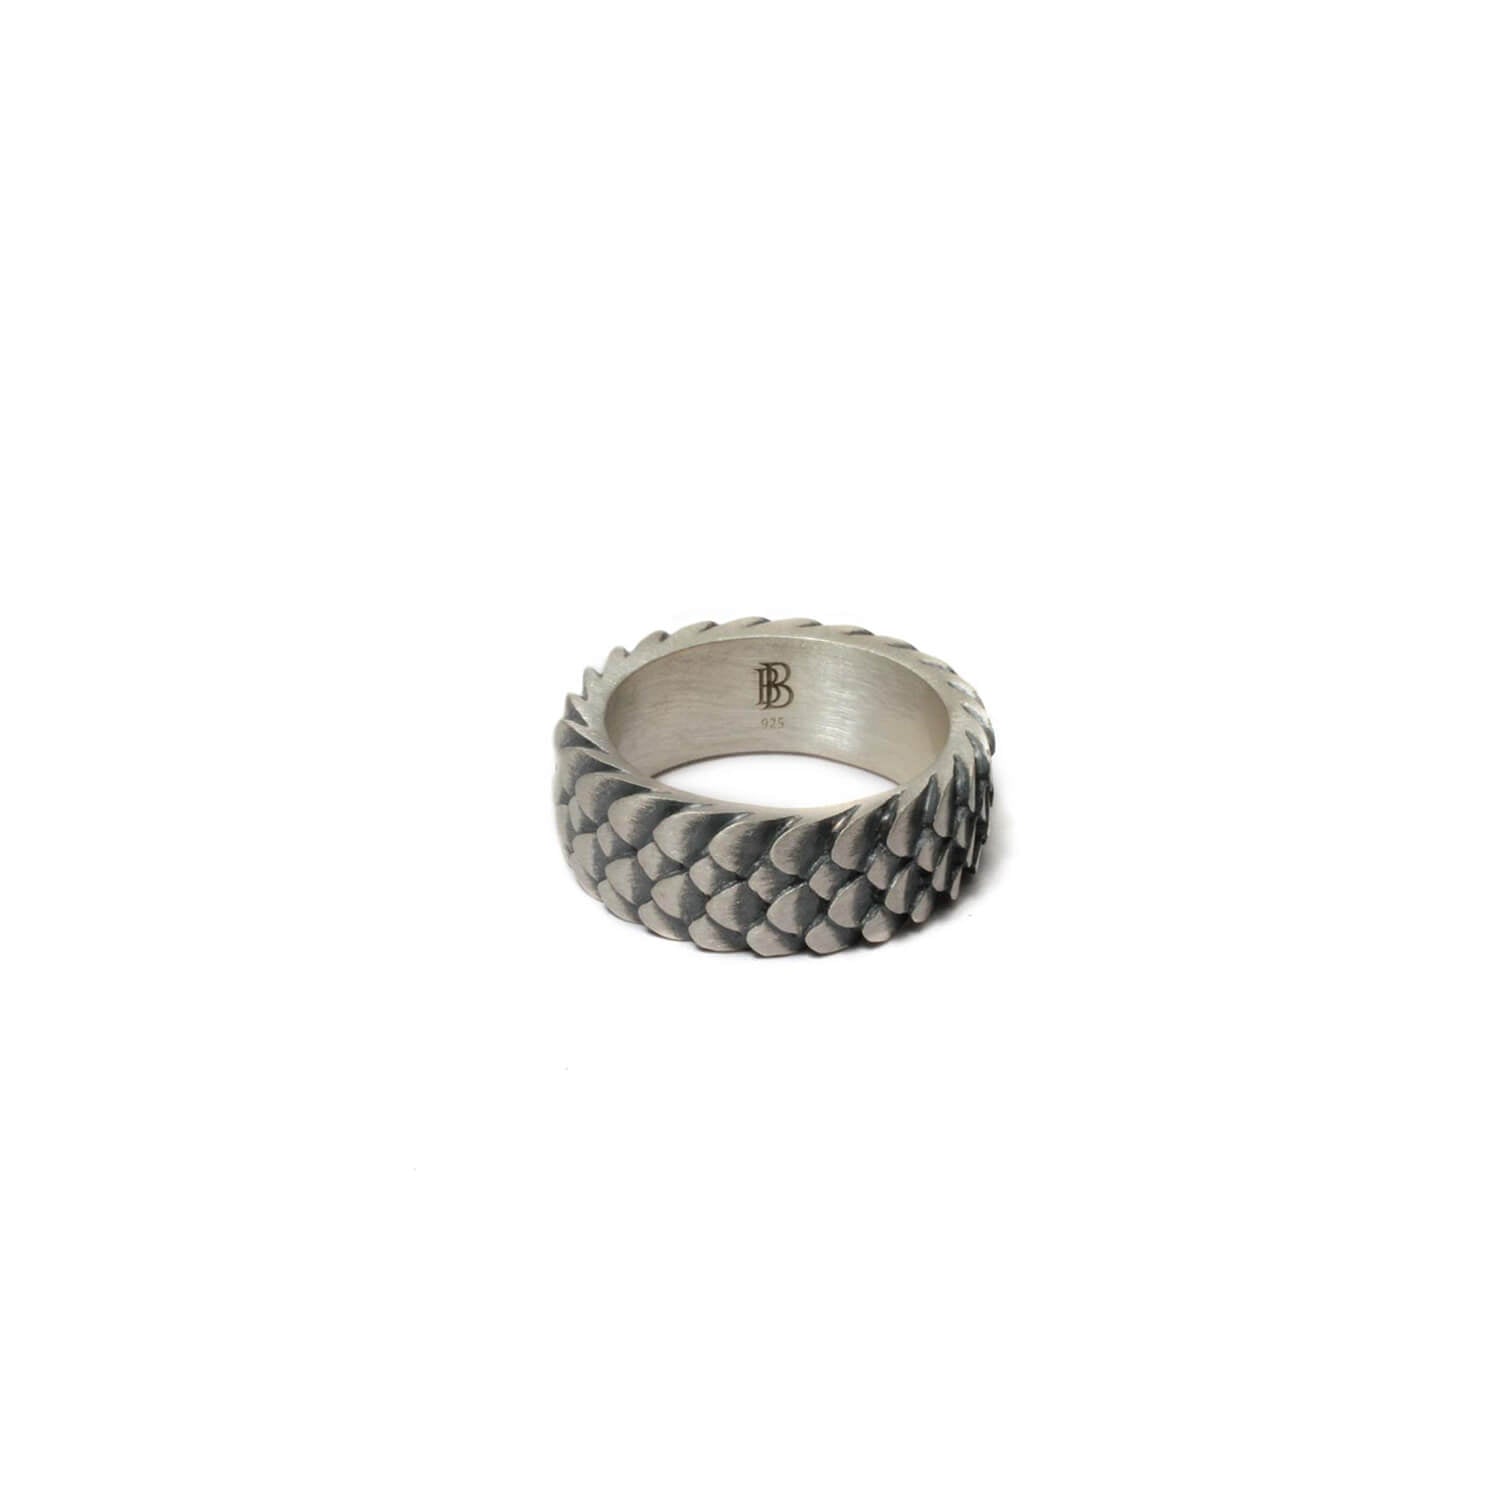 Dragon scales  Ring in oxidized 925 Sterling Silver